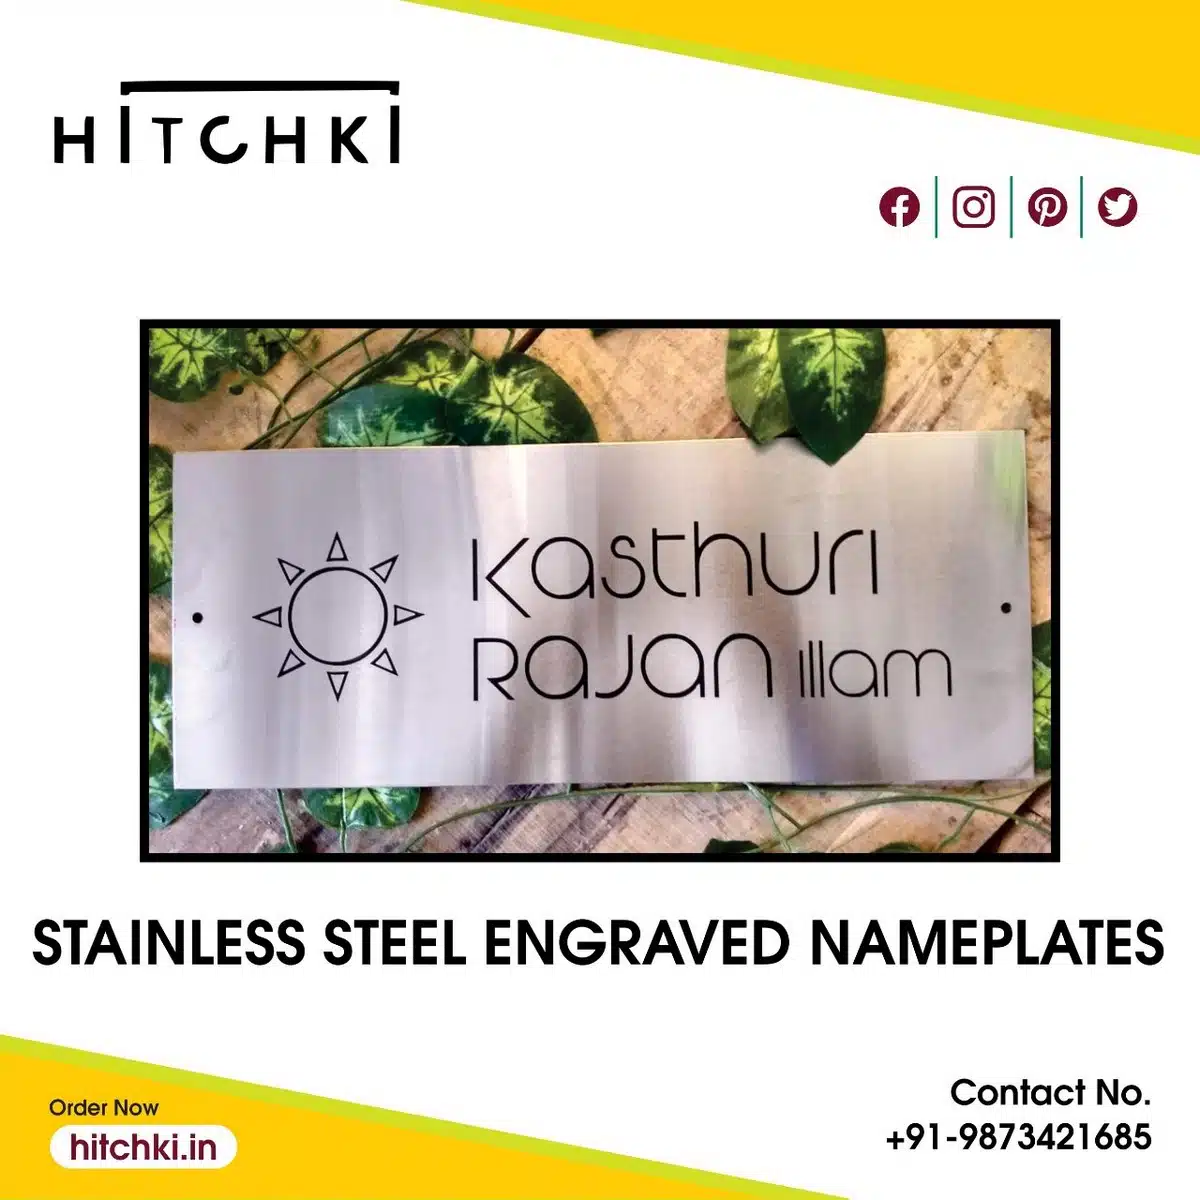 Buy Durable Stainless Steel Engraved Nameplates